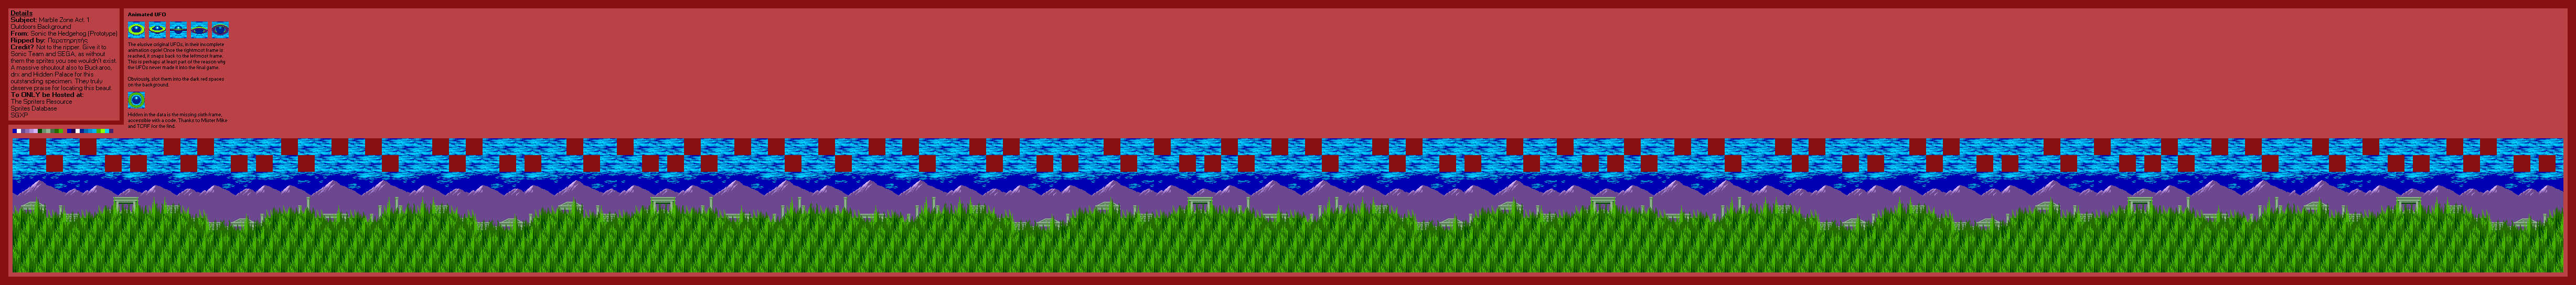 Sonic the Hedgehog (Prototype) - Marble Zone Act. 1 (Outdoors)